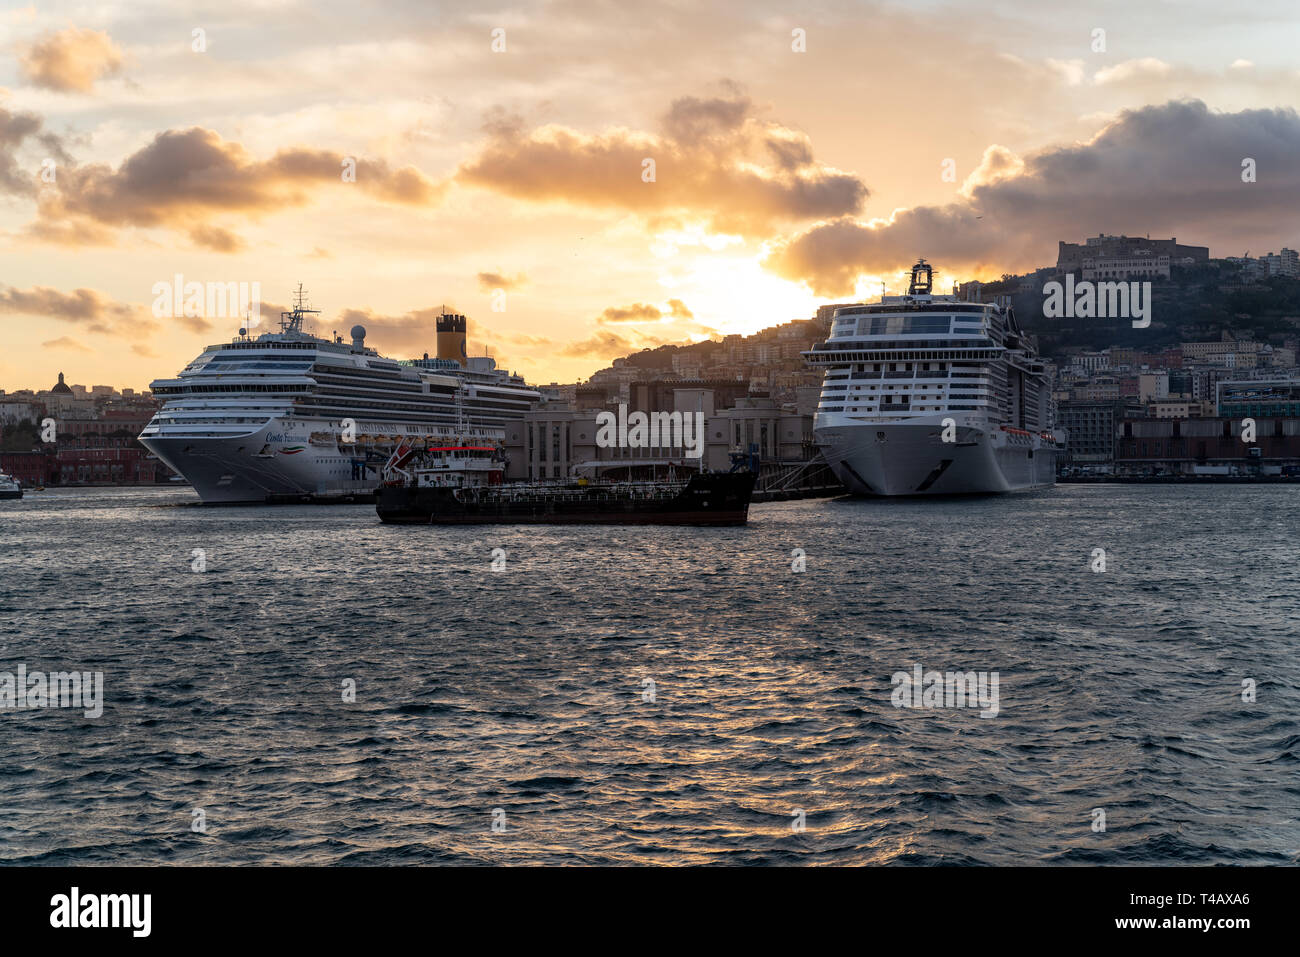 Msc Crociere High Resolution Stock Photography and Images - Alamy